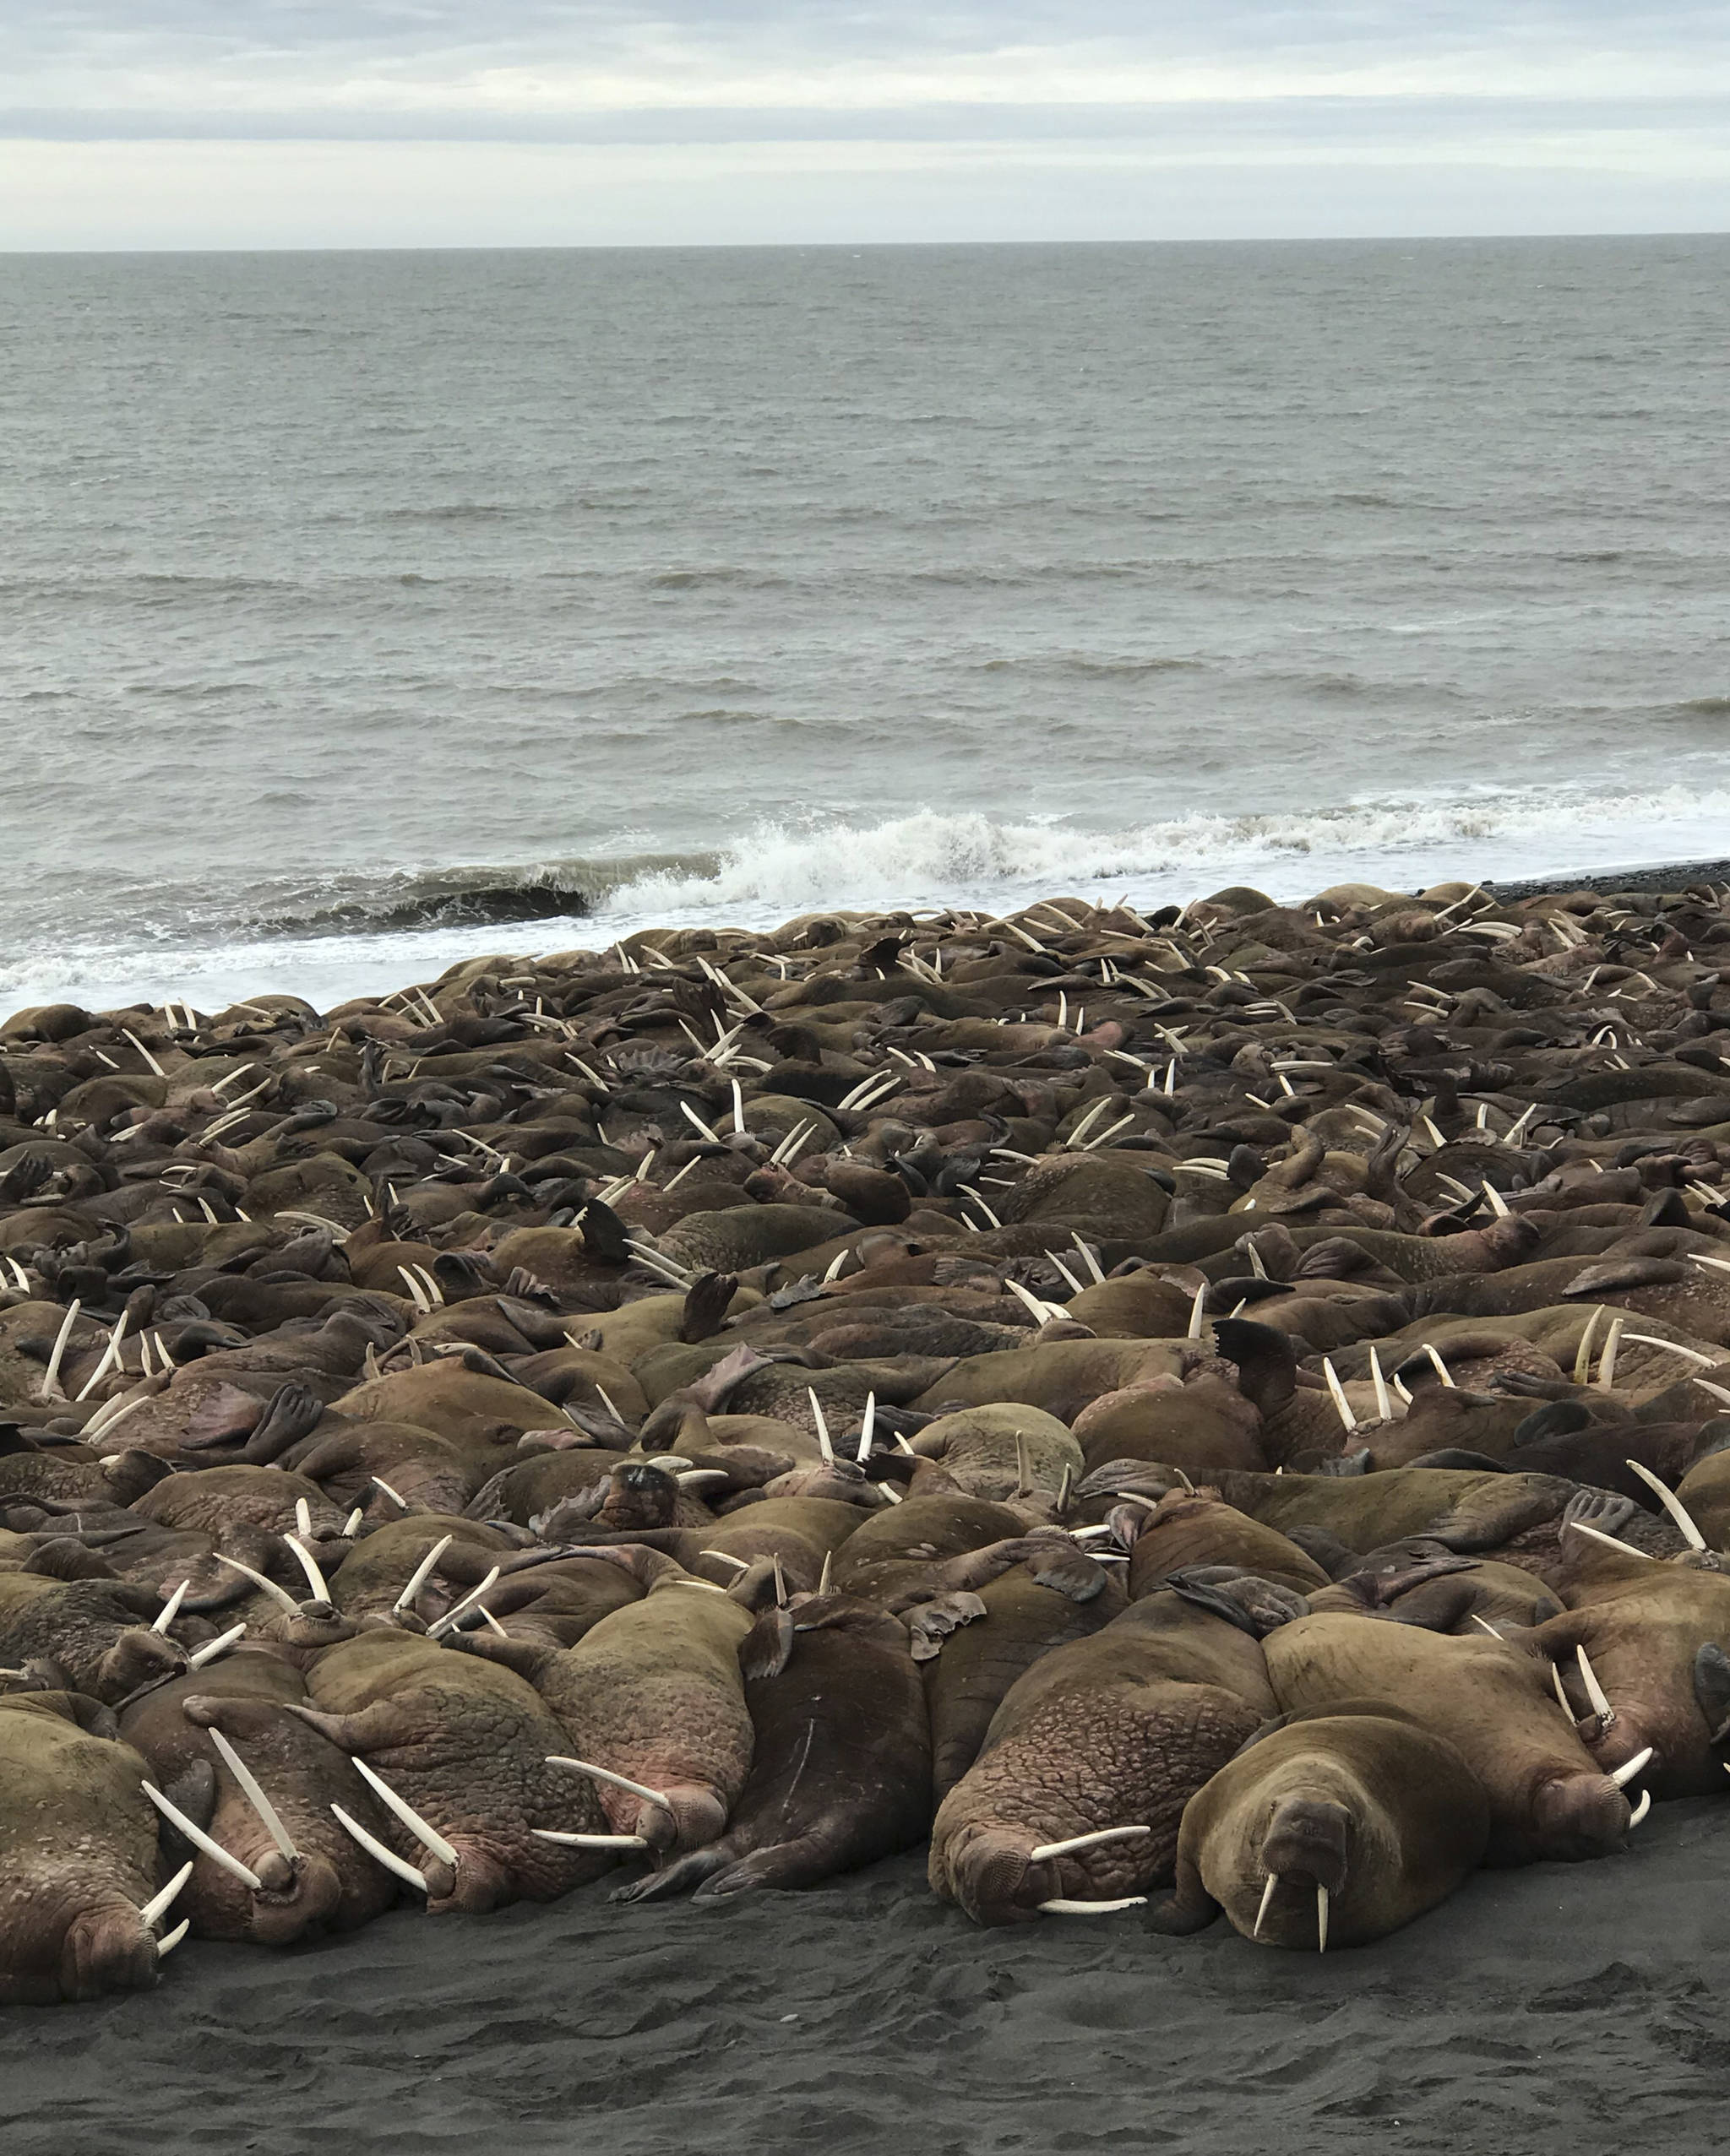 In this April 7, 2018 photo provided by John Christensen Jr., Pacific walruses rest on a beach a few miles outside Port Heiden, Alaska. Male walruses traditionally spend summers in the Bering Sea near Bristol Bay about 120 miles north of Port Heiden. The U.S. Fish and Wildlife Service says they may be seeking new foraging grounds. (John Christensen Jr. via AP)